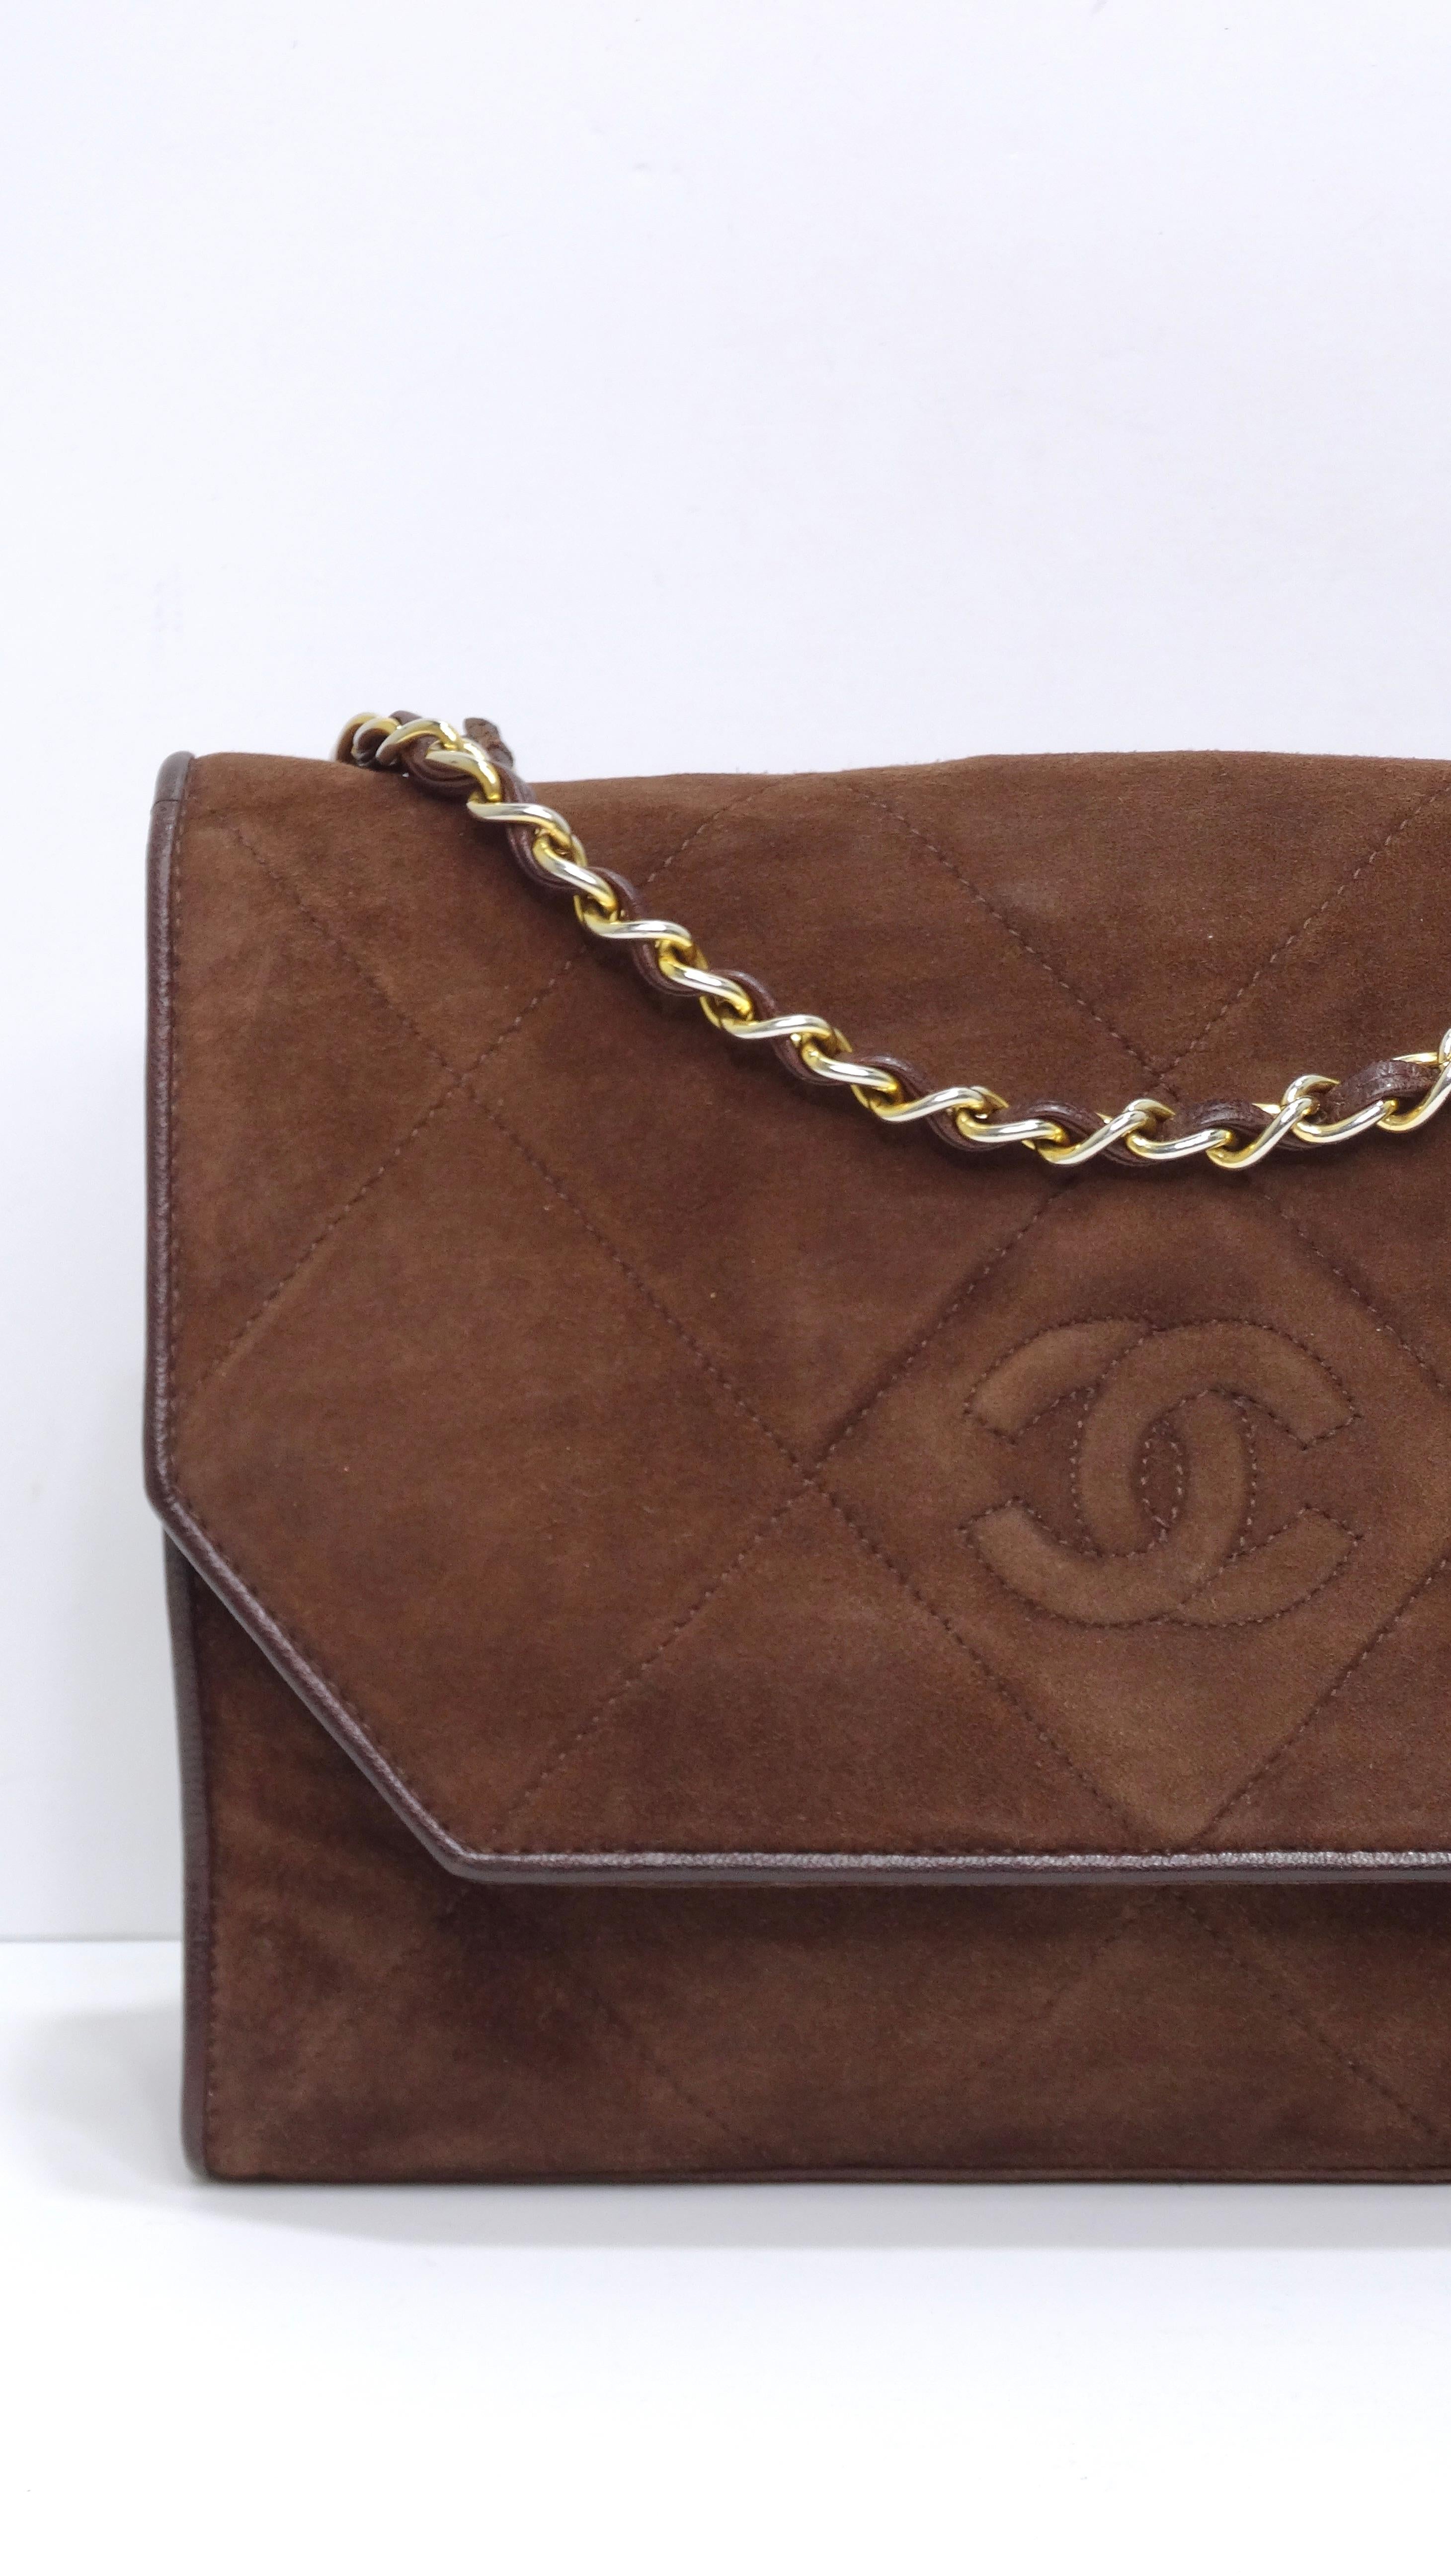 This suede Chanel is your new favorite collectors item! This bag will take you through your everyday as it has a roomy interior and can fit a wallet, keys, phone, and other small items. It features a rich brown quilted suede with matching brown